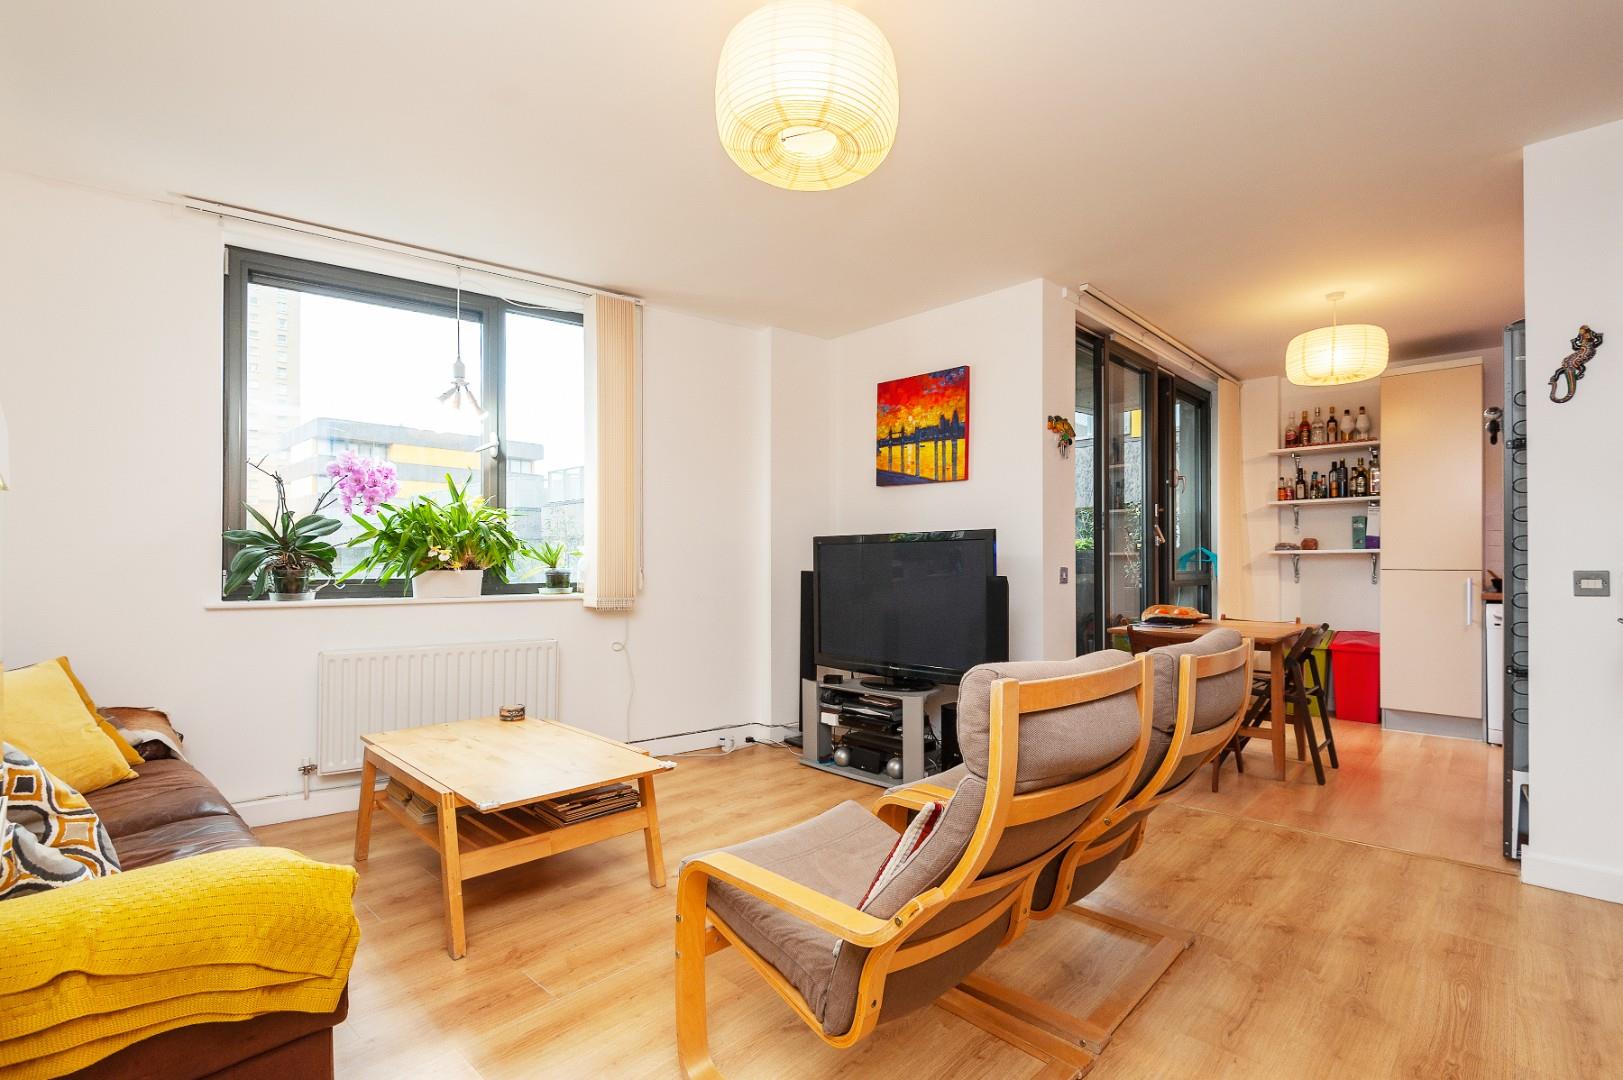 Similar Property: Apartment in Shadwell